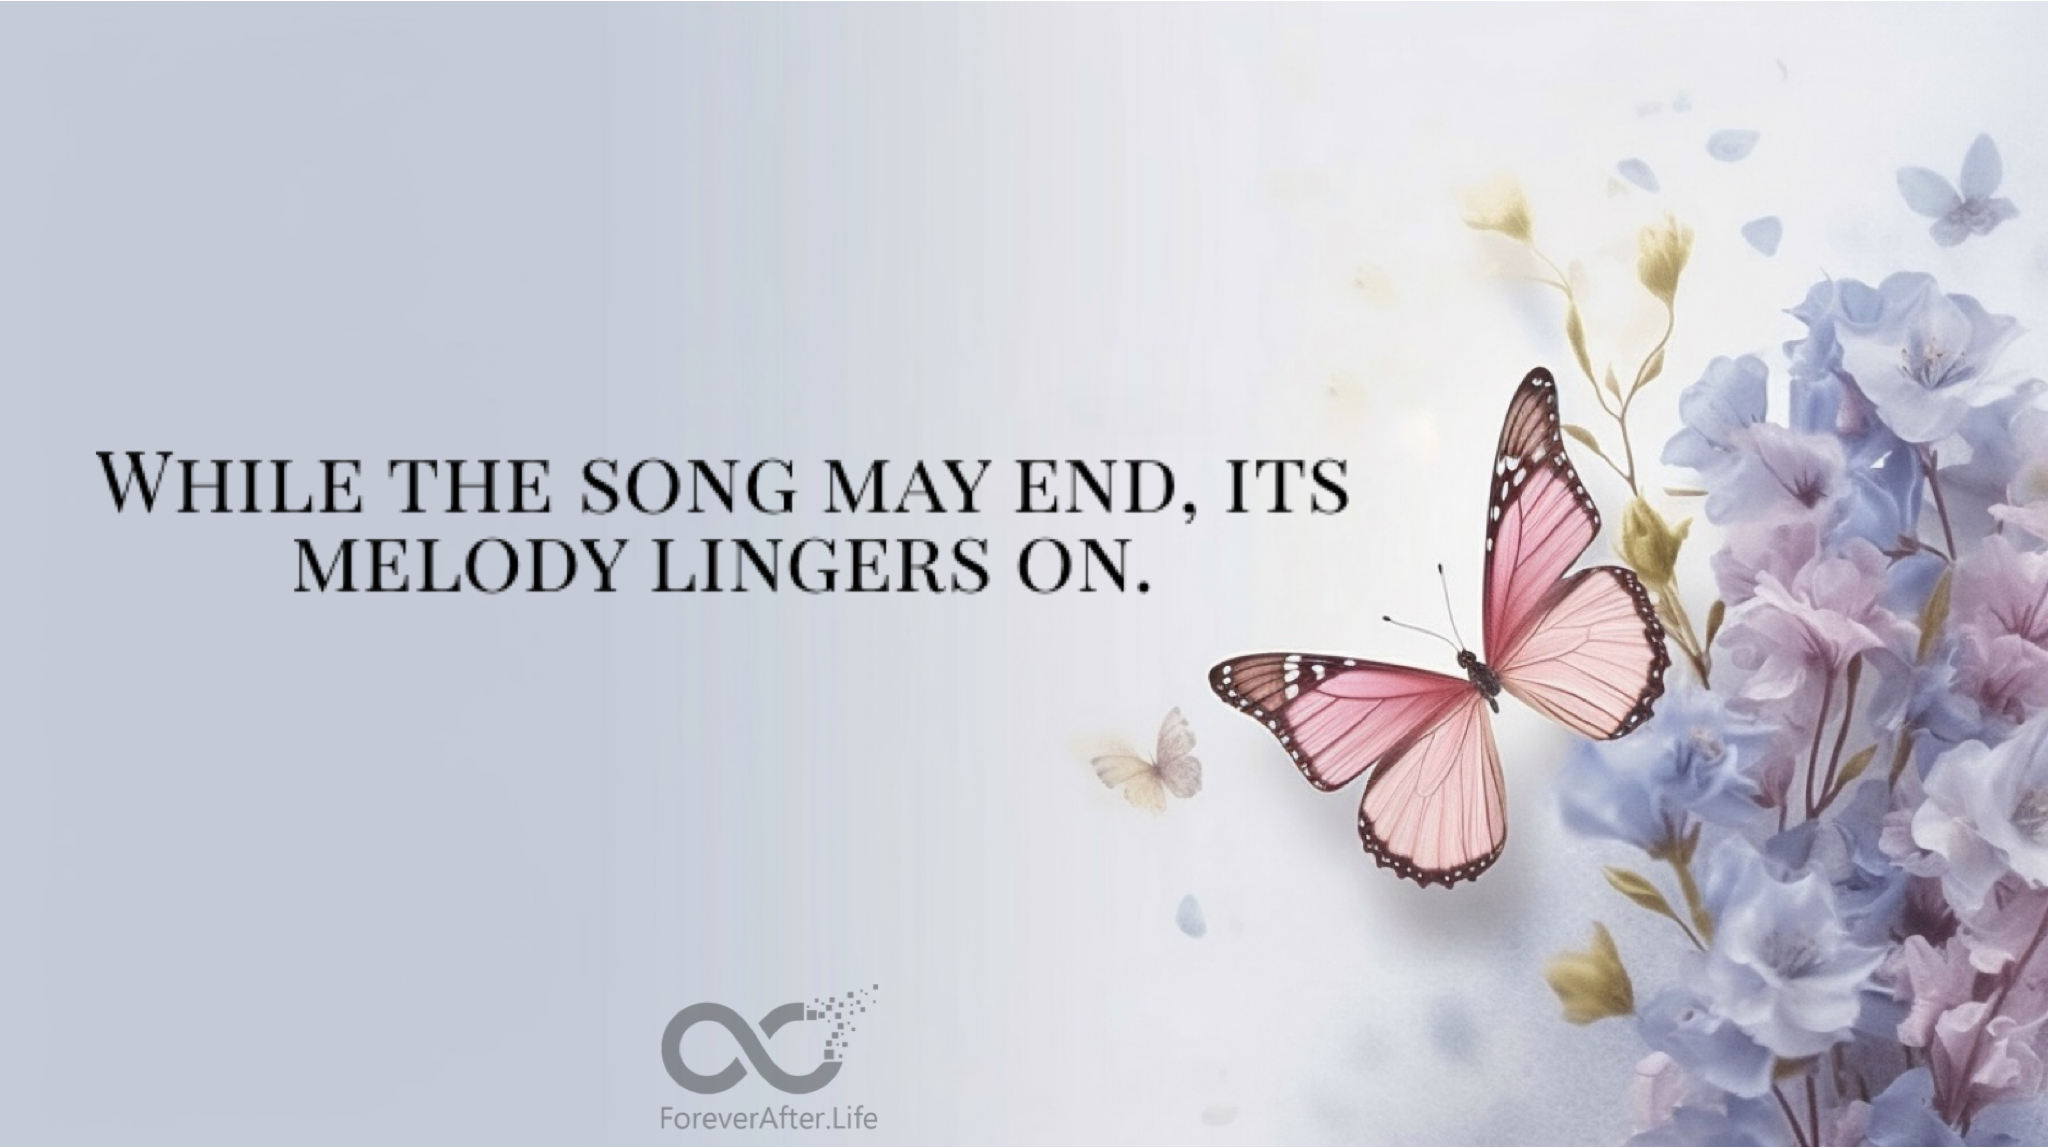 While the song may end, its melody lingers on.